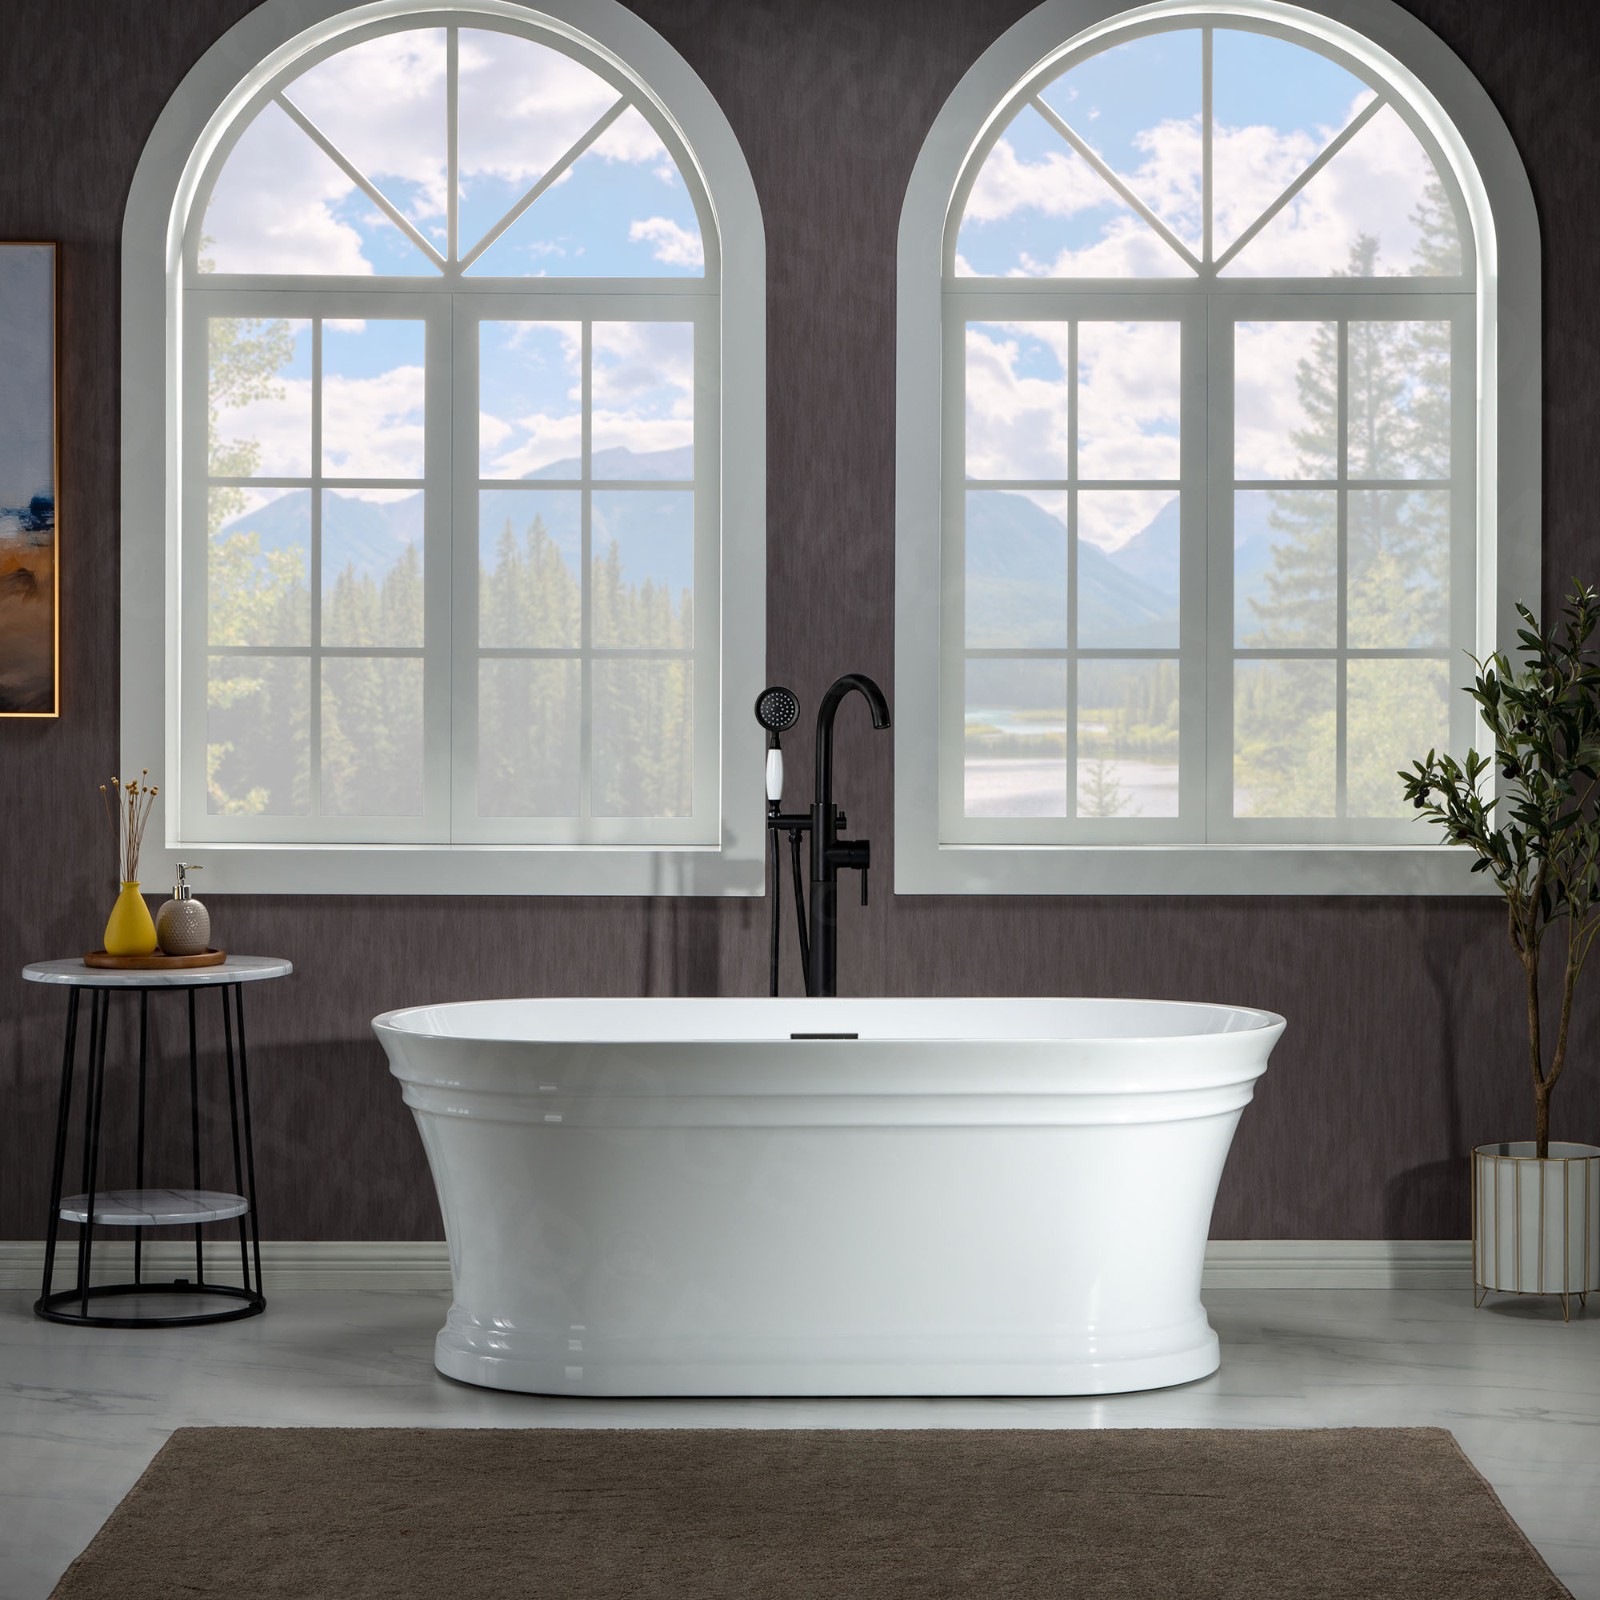  WOODBRIDGE 59 in. Freestanding Double Ended Acrylic Soaking Bathtub with Center Drain Assembly and Overflow, BTA1536/B1536, Glossy White_7813